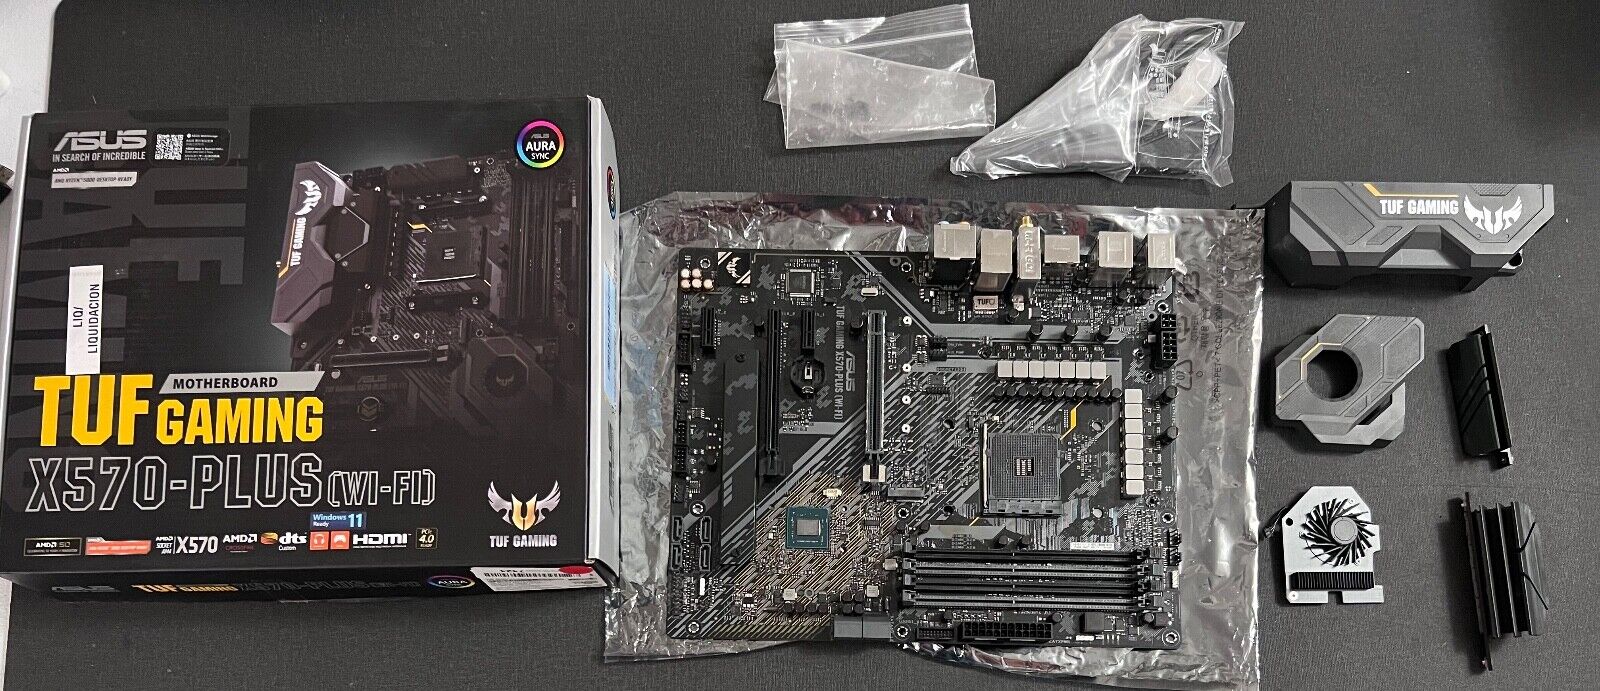 As-is Untested ASUS AM4 TUF Gaming X570-Plus (Wi-Fi) ATX Motherboard With PCIe